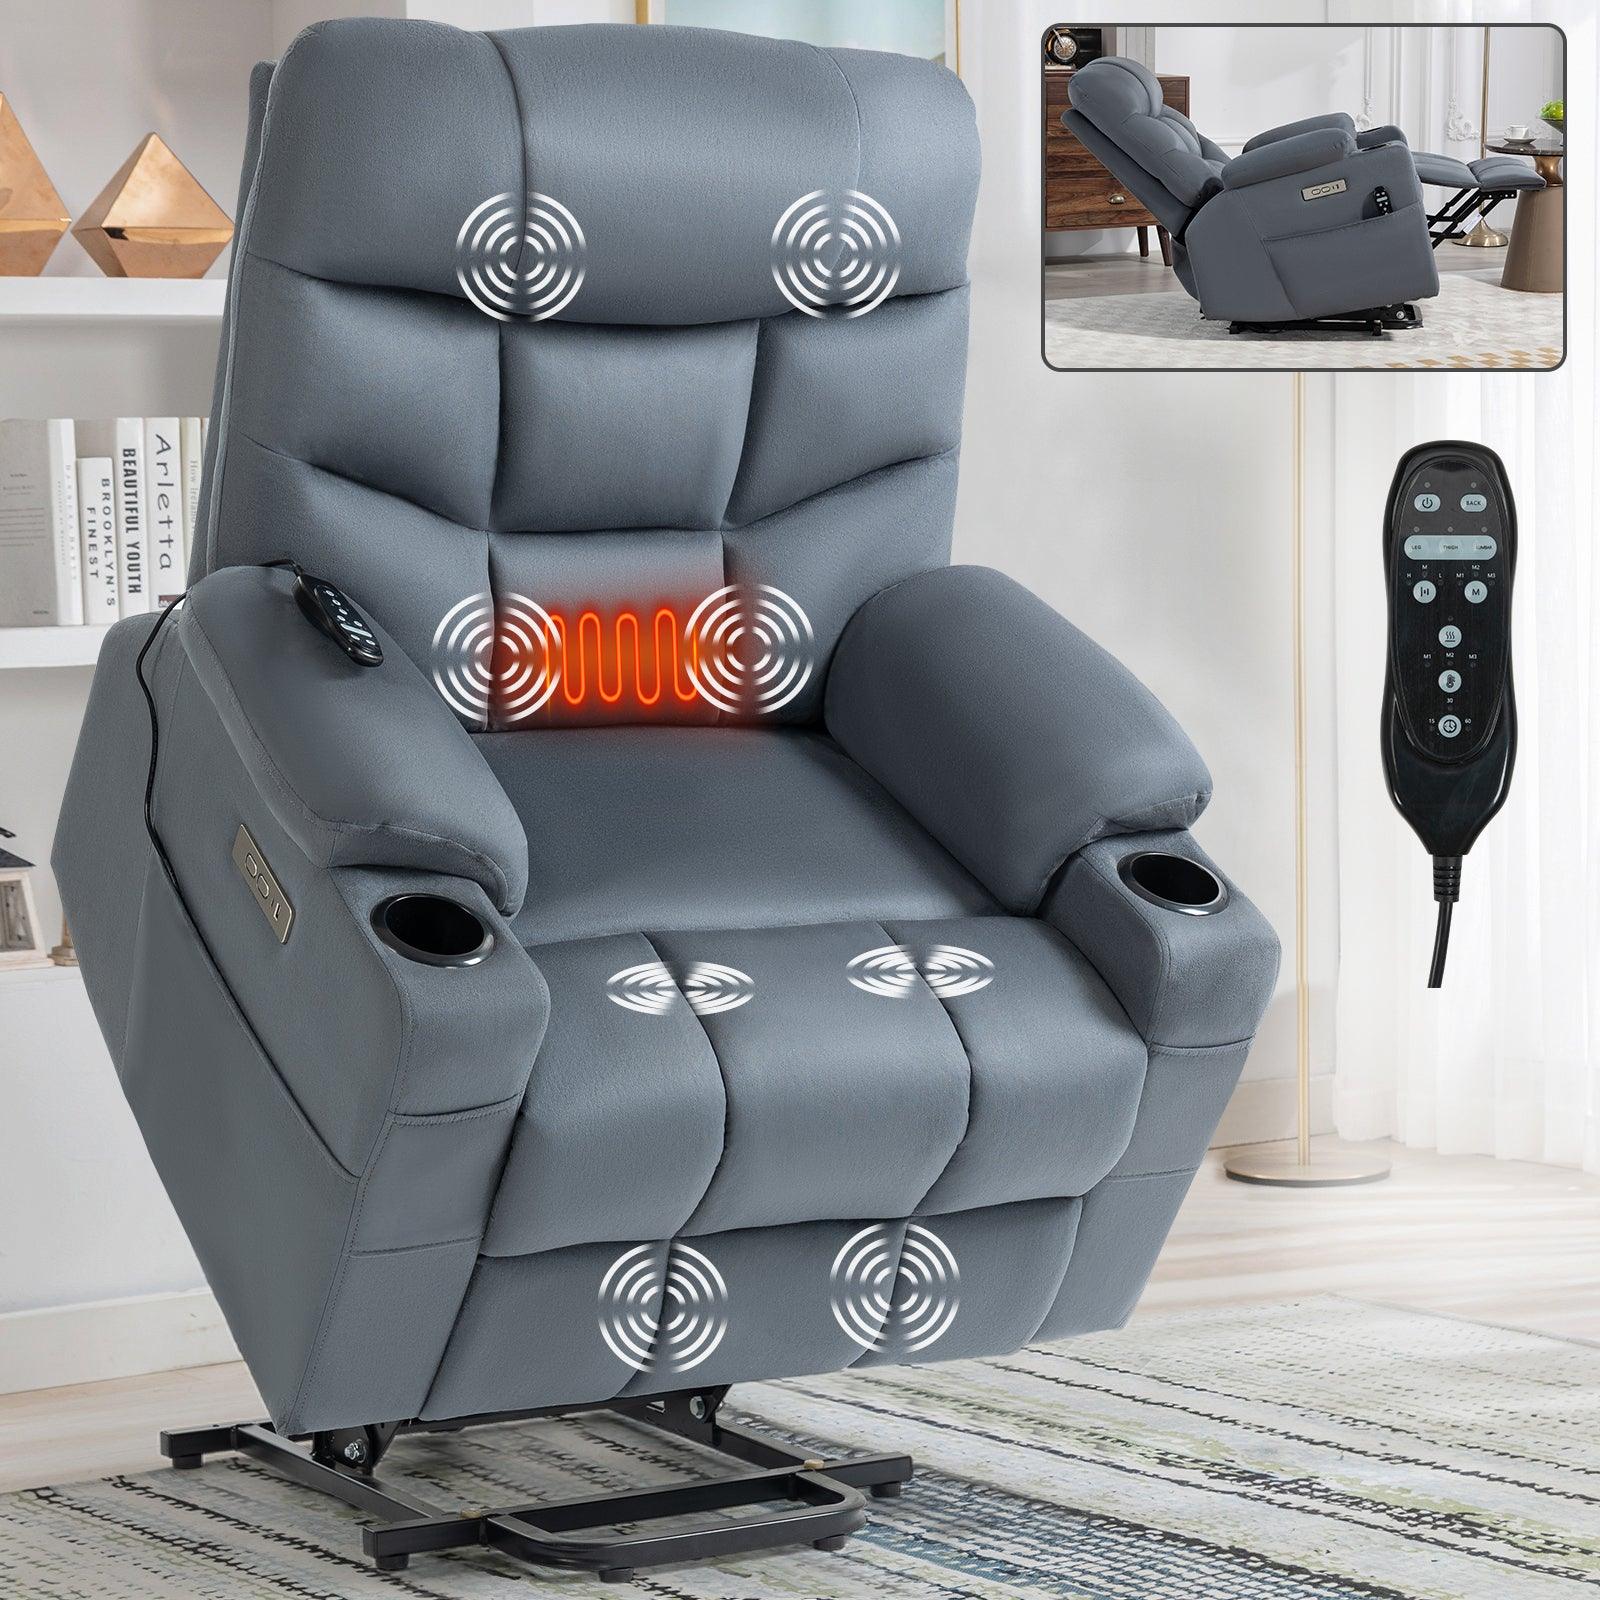 🆓🚛 Okin Motor Up To 350 Lbs Power Lift Recliner Chair, Heavy Duty Motion Mechanism With 8-Point Vibration Massage & Lumbar Heating, Cup Holders, Usb & Type-C Ports, Removable Cushions, Blue